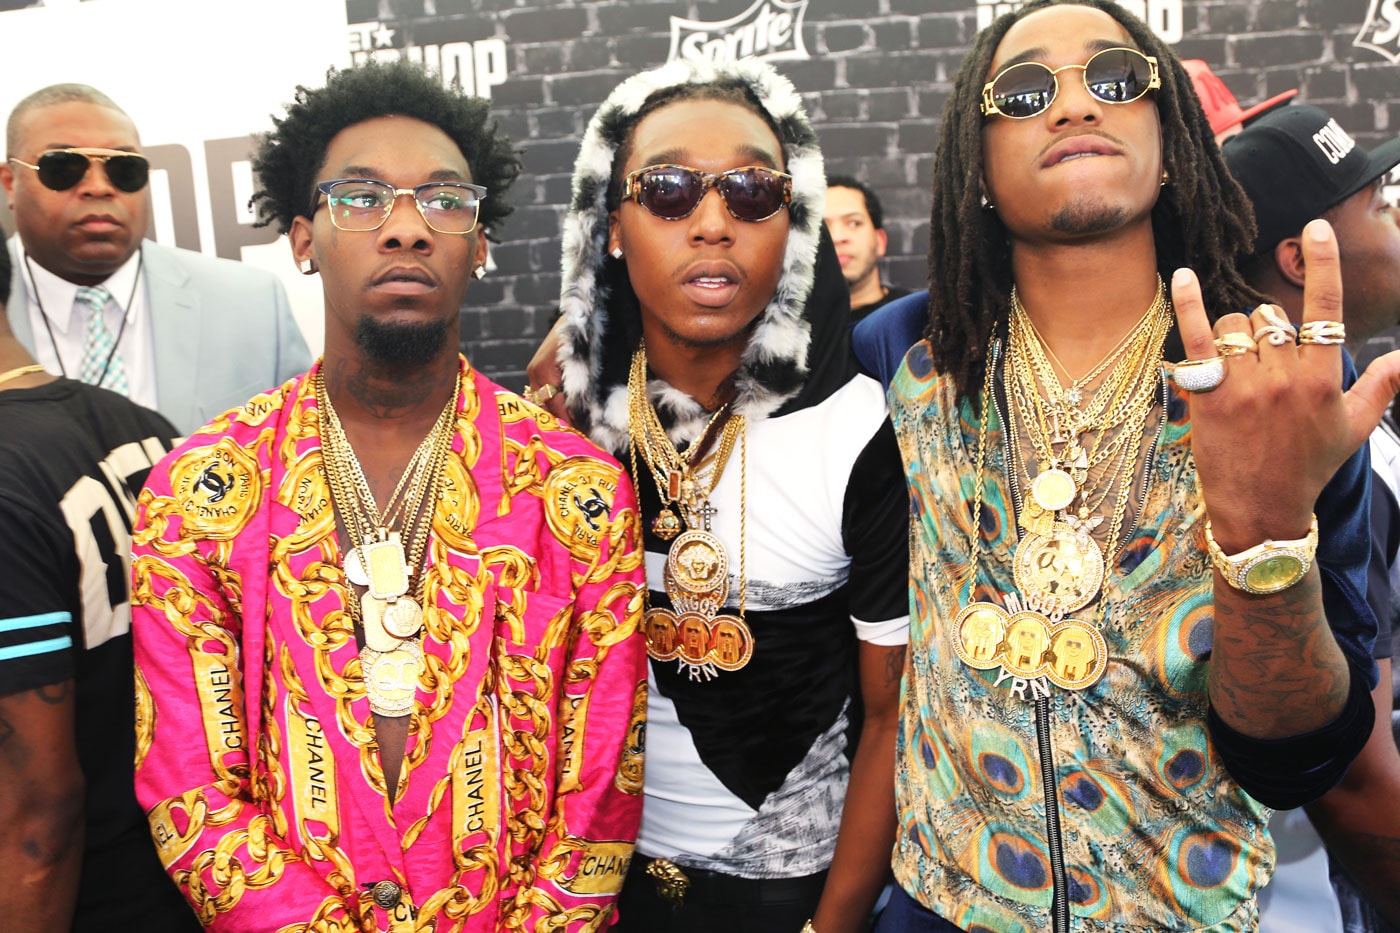 Migos - Young Rich Nation (Review)